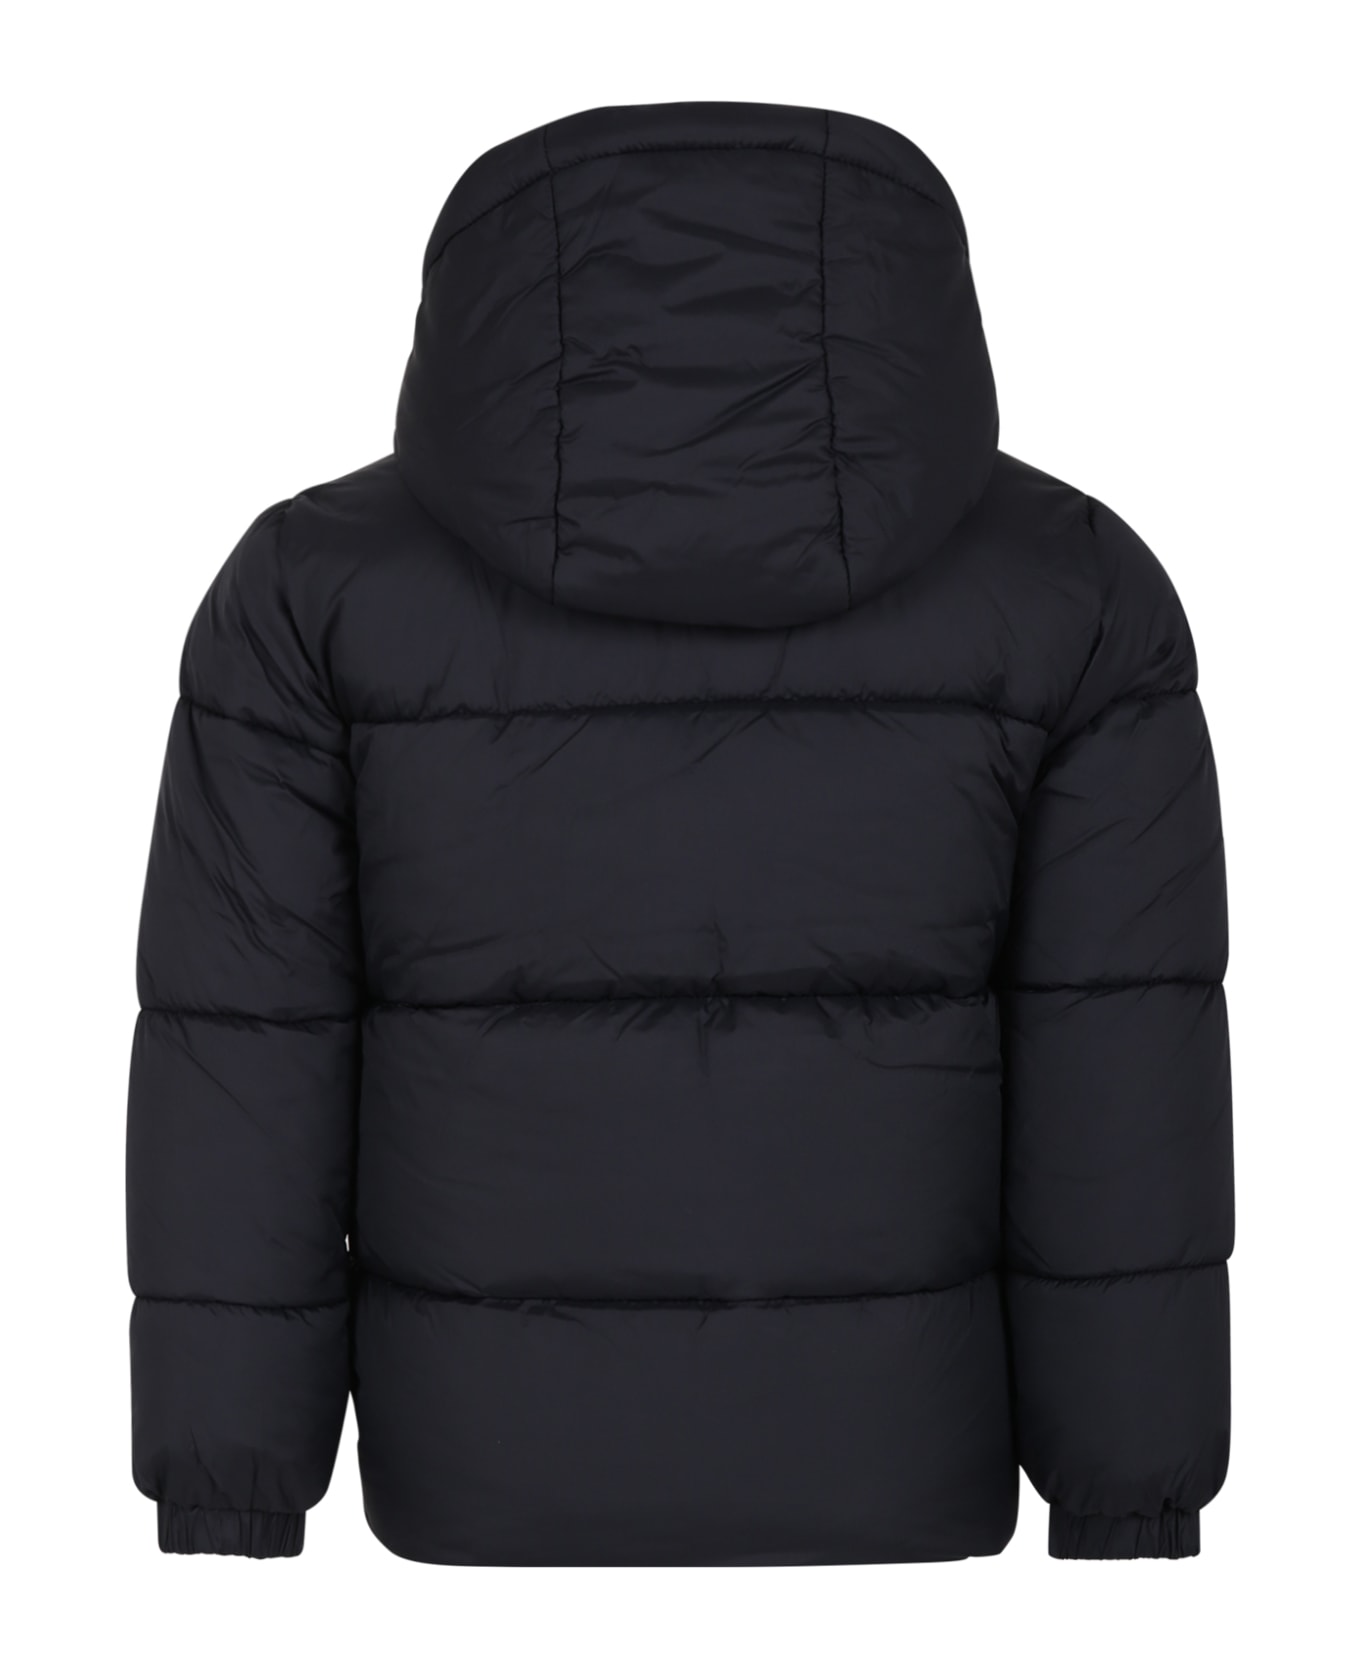 Timberland Black Down Jacket For Boy With Tree - Black コート＆ジャケット